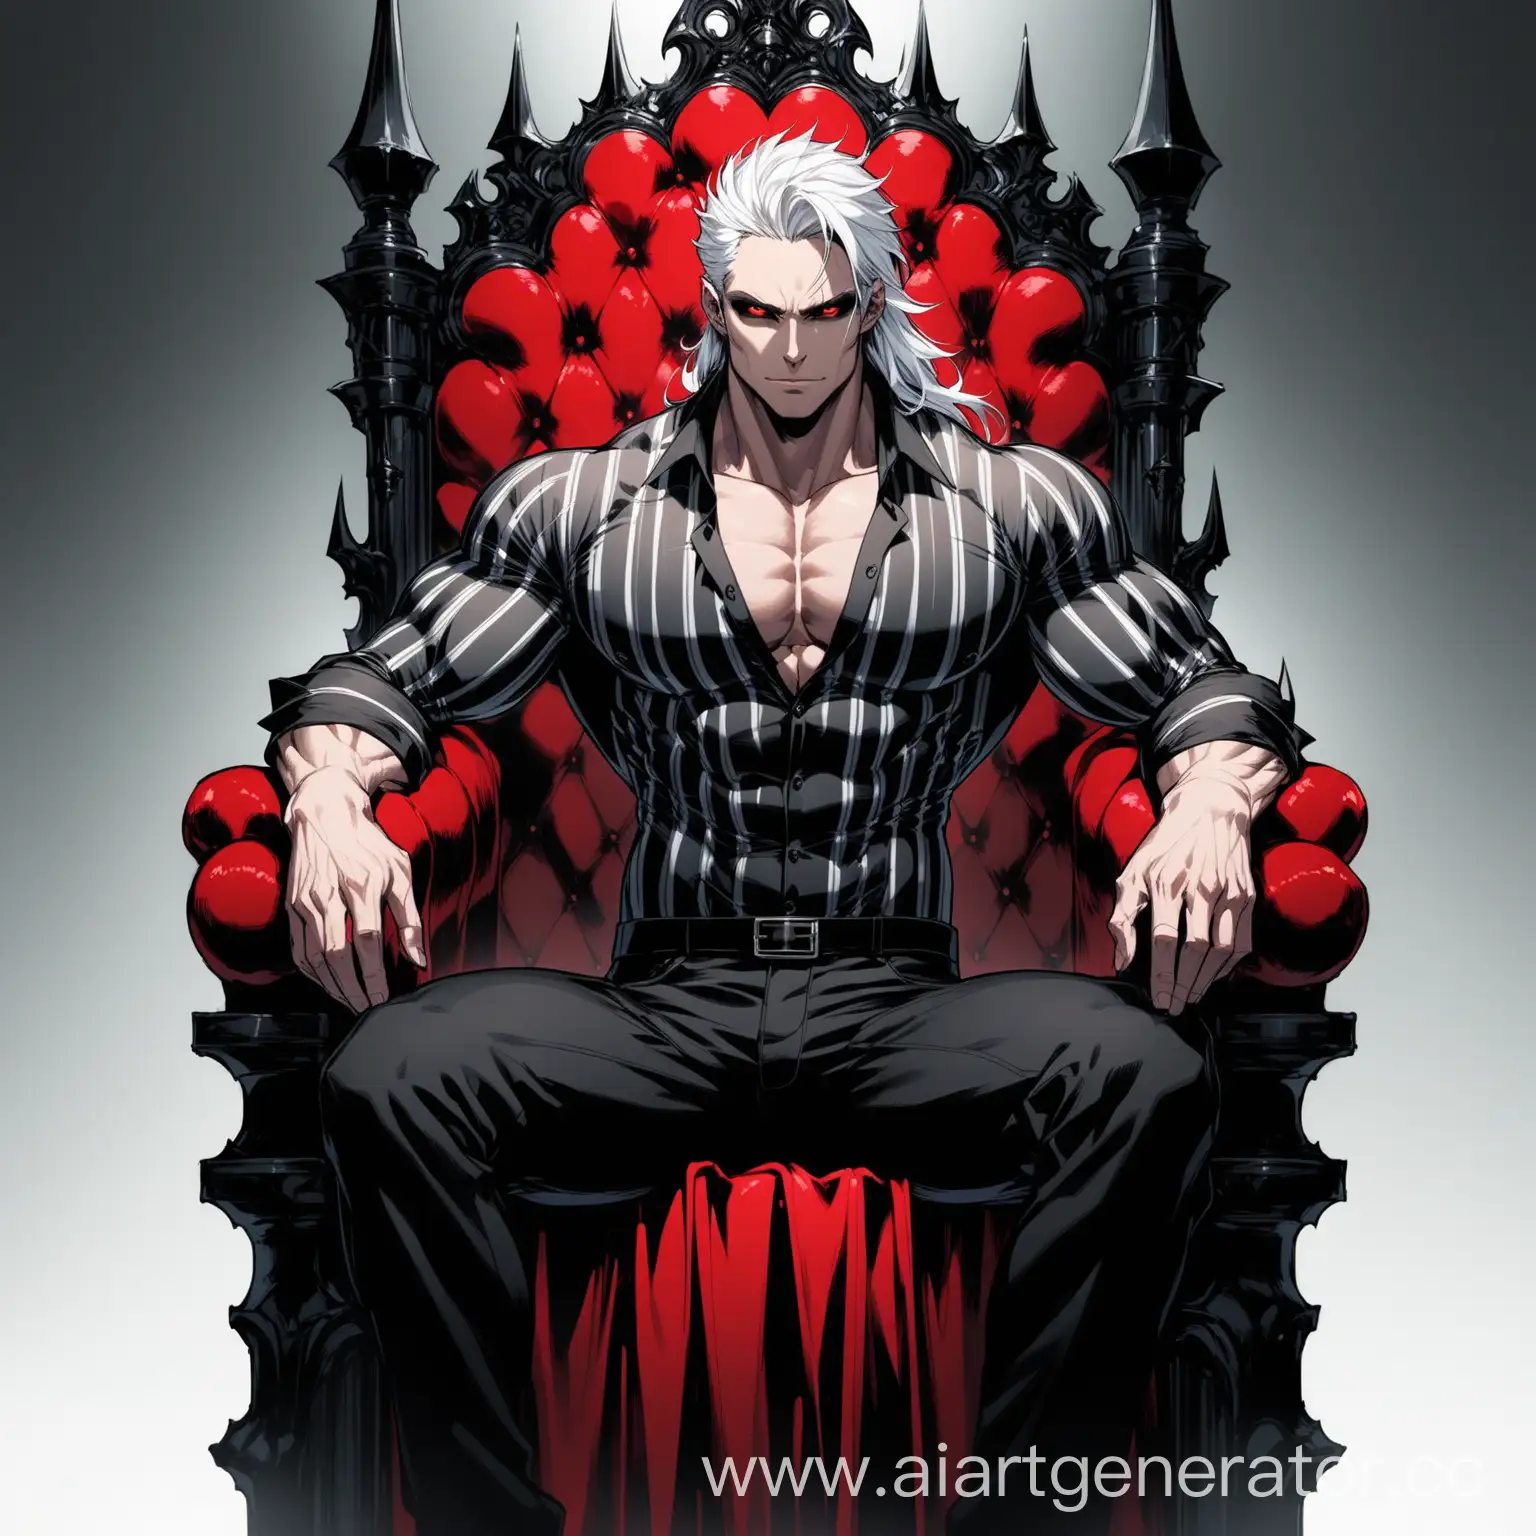 A man, tall,sits on a throne, white hair, red pupils with black sclera, fair skin,muscular body, black unbuttoned shirt, black pants with white longitudinal stripes.